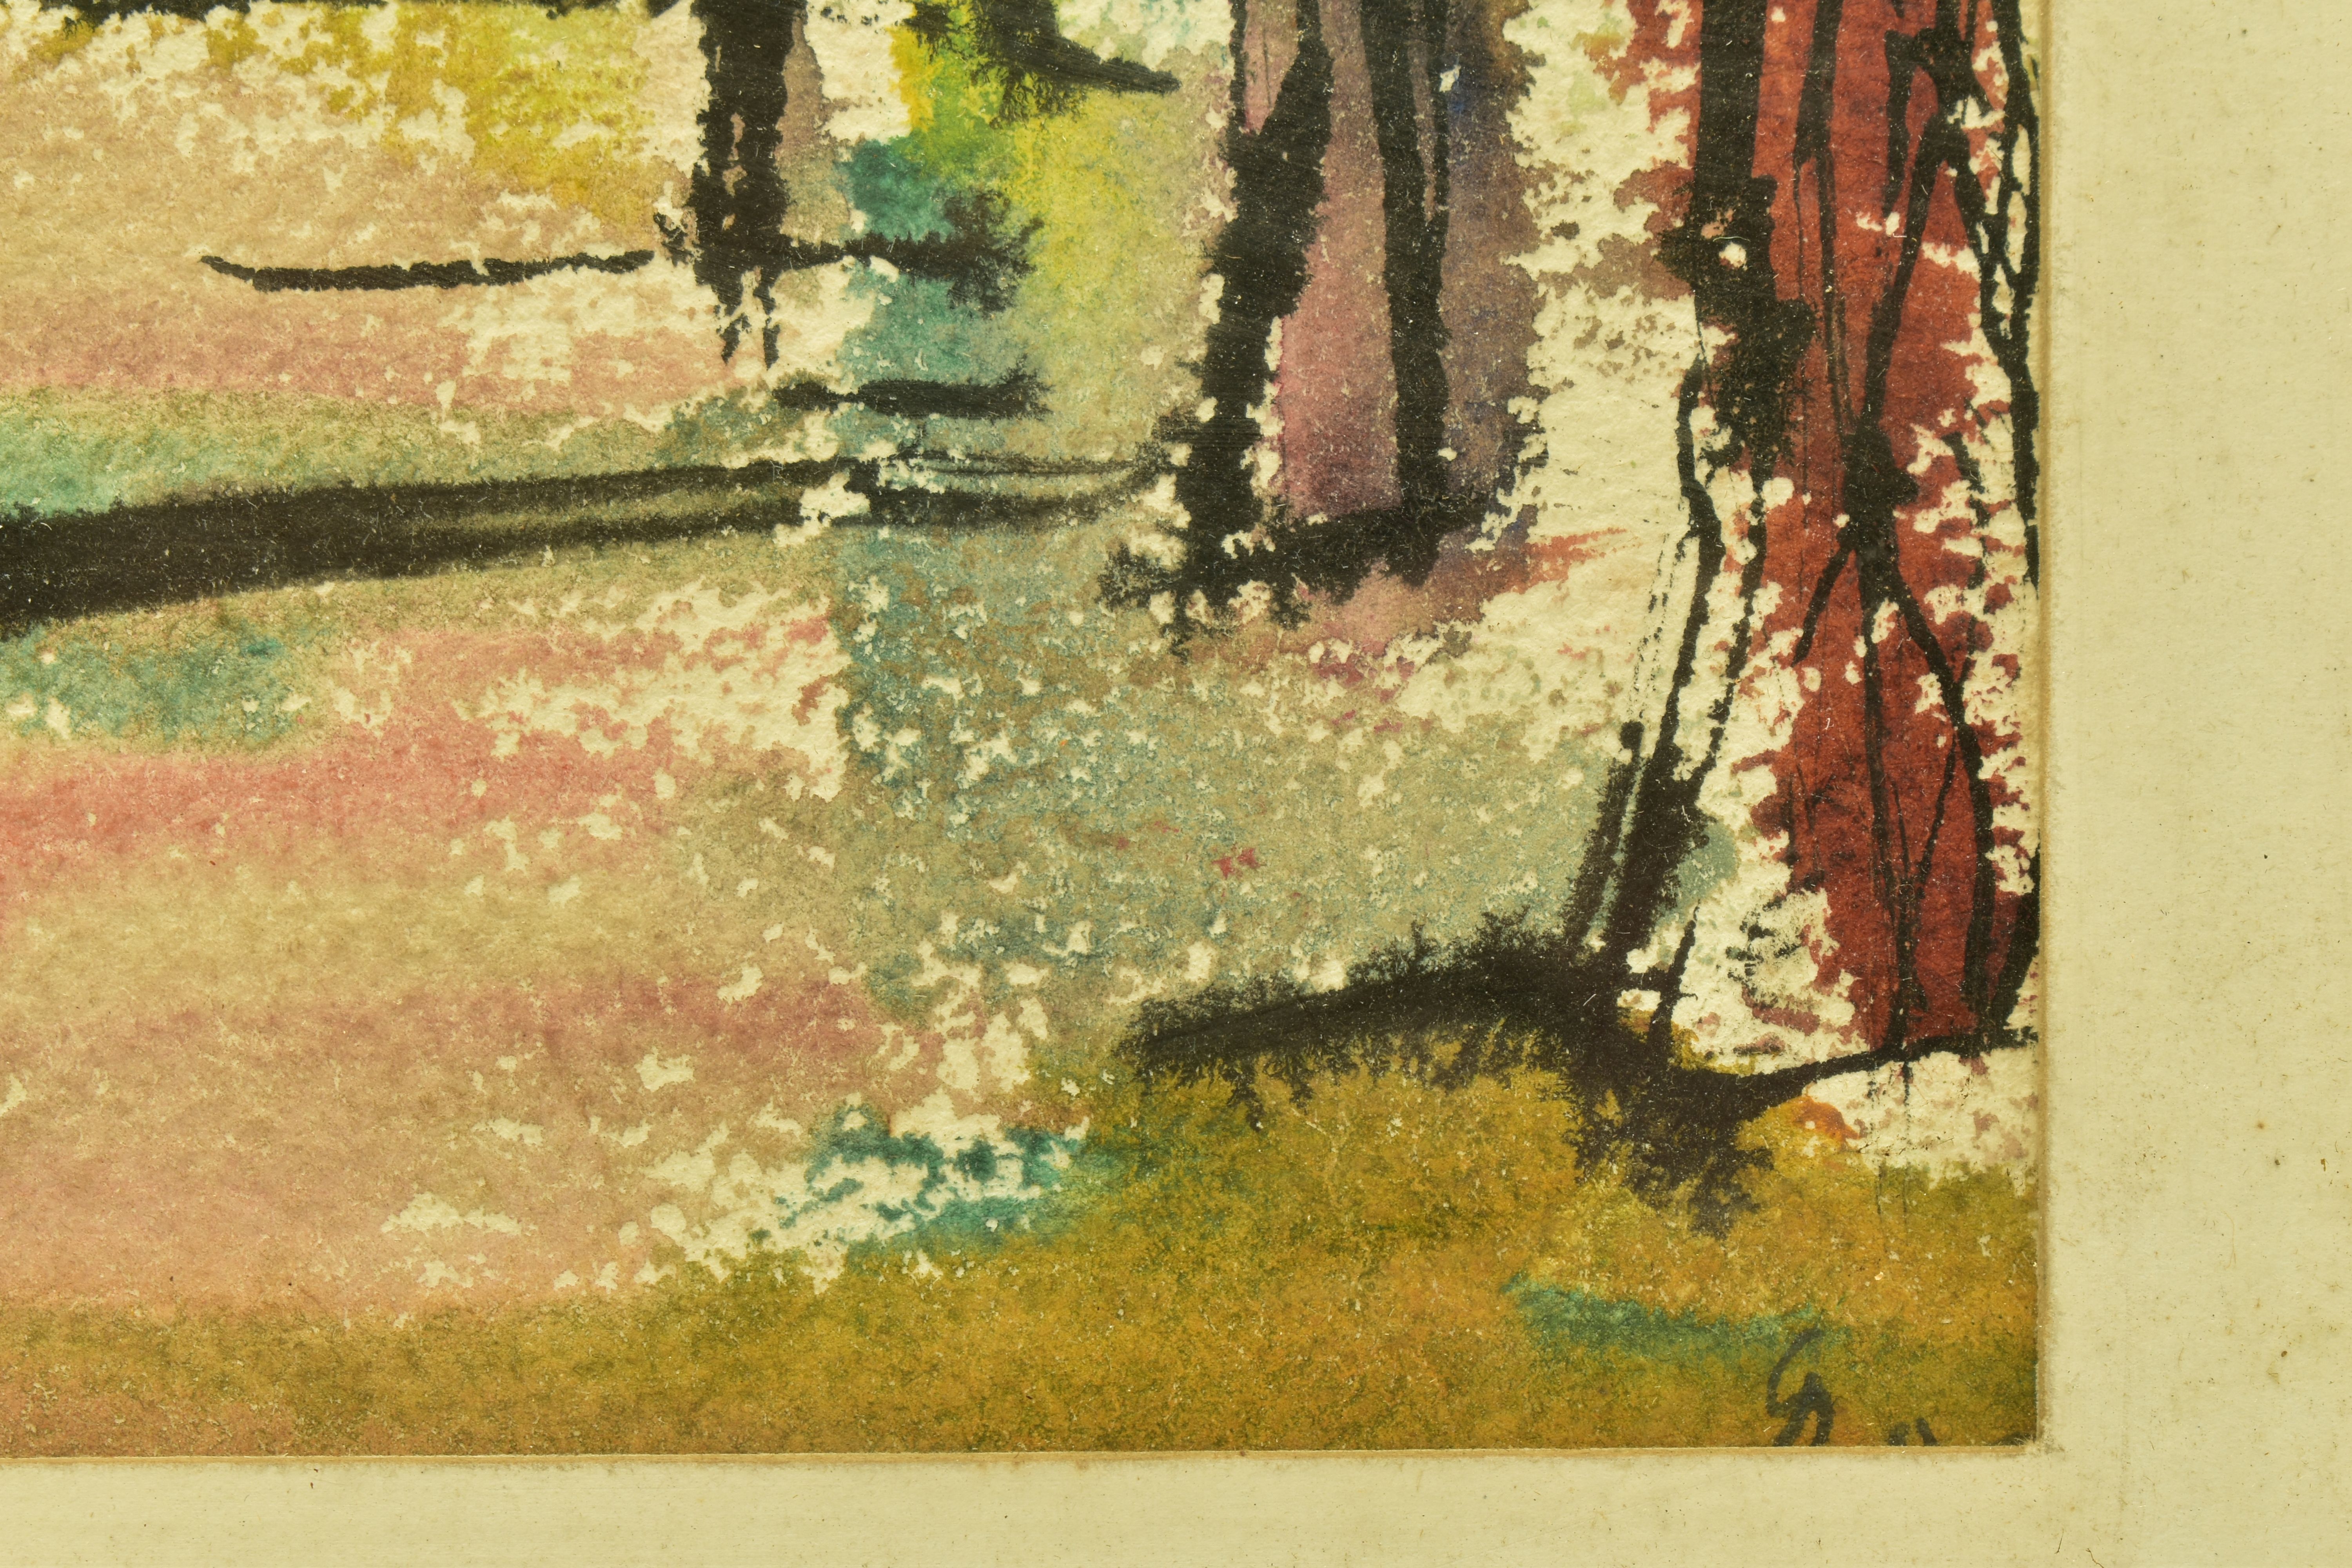 DR G.H. ROSE (20TH CENTURY) 'PARK AT GRANGE COURT, CHIGWELL', a colourful landscape, initialled - Image 3 of 5